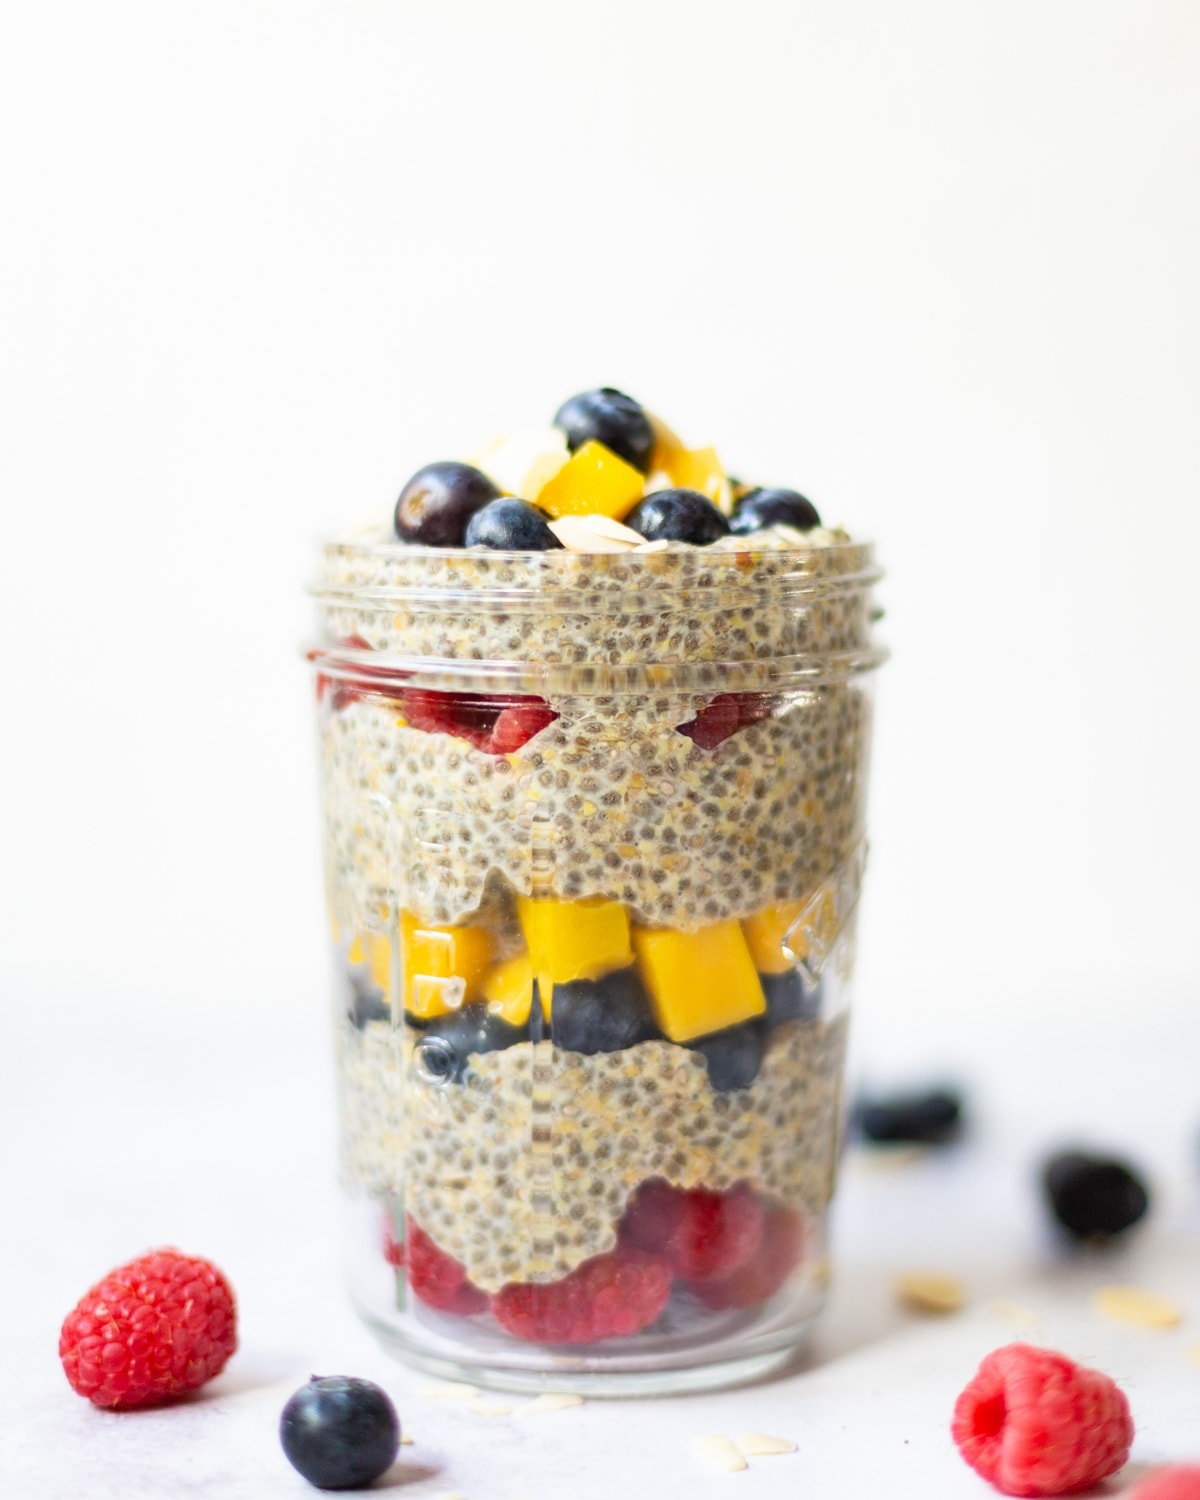 Chia and flaxseed pudding in a jar layered with raspberries, blueberries and diced mango.